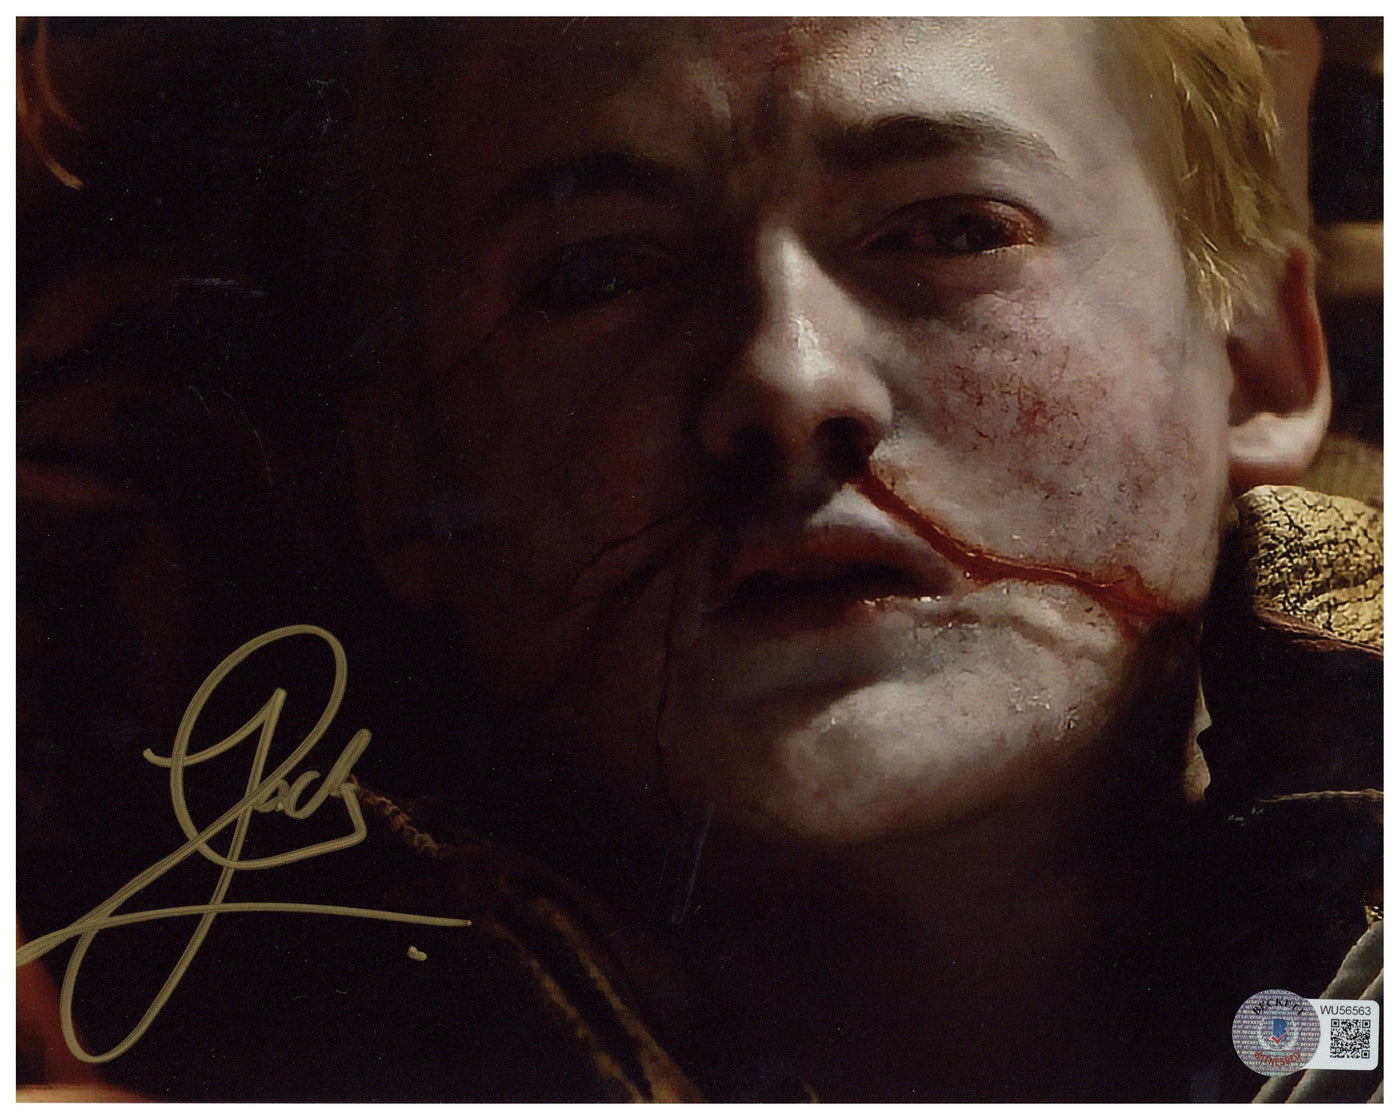 JACK GLEESON SIGNED 8X10 PHOTO GAME OF THRONES JOFFREY AUTOGRAPHED BAS 3